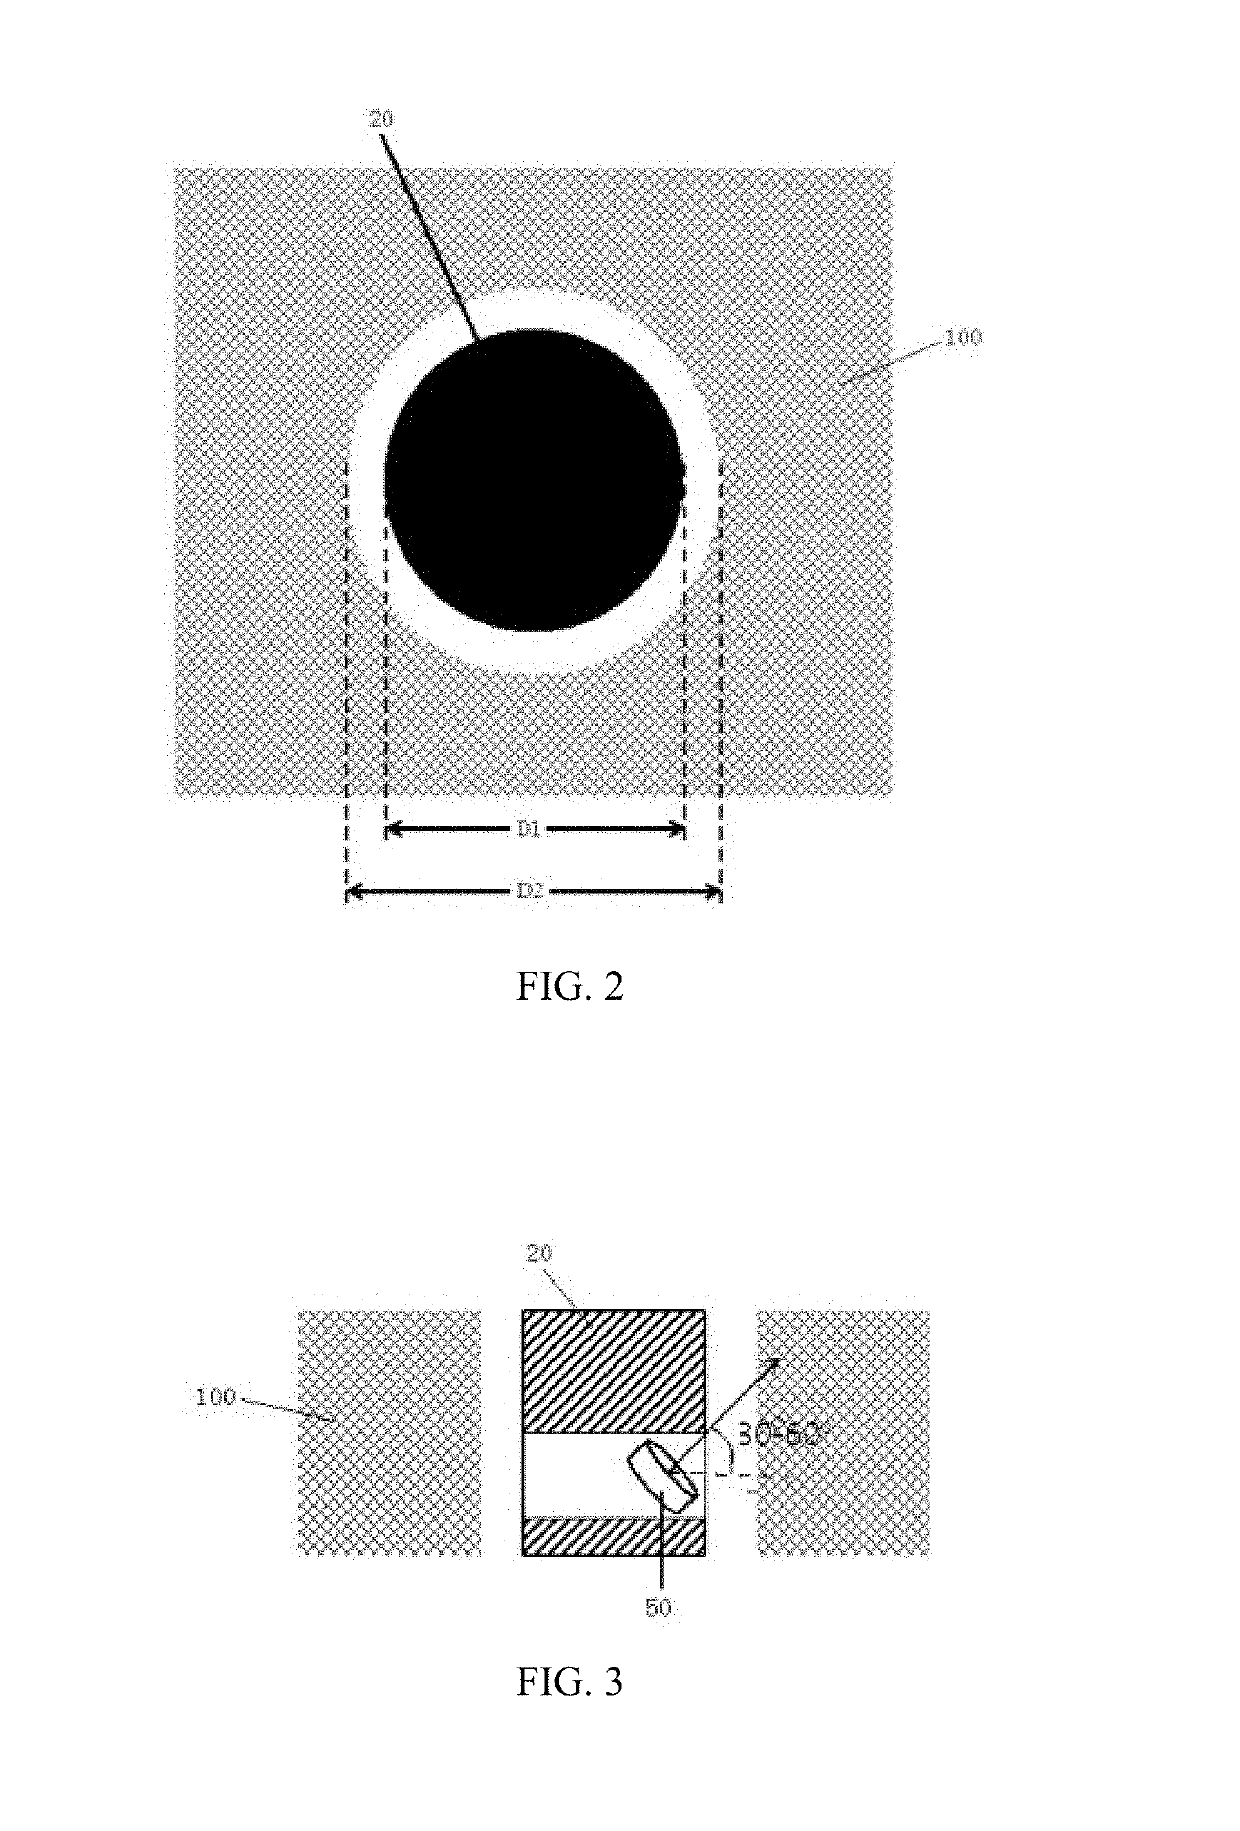 Monopole acoustic logging while drilling instrument used together with bottom hole assembly, method for measuring shear wave velocity of slow formations